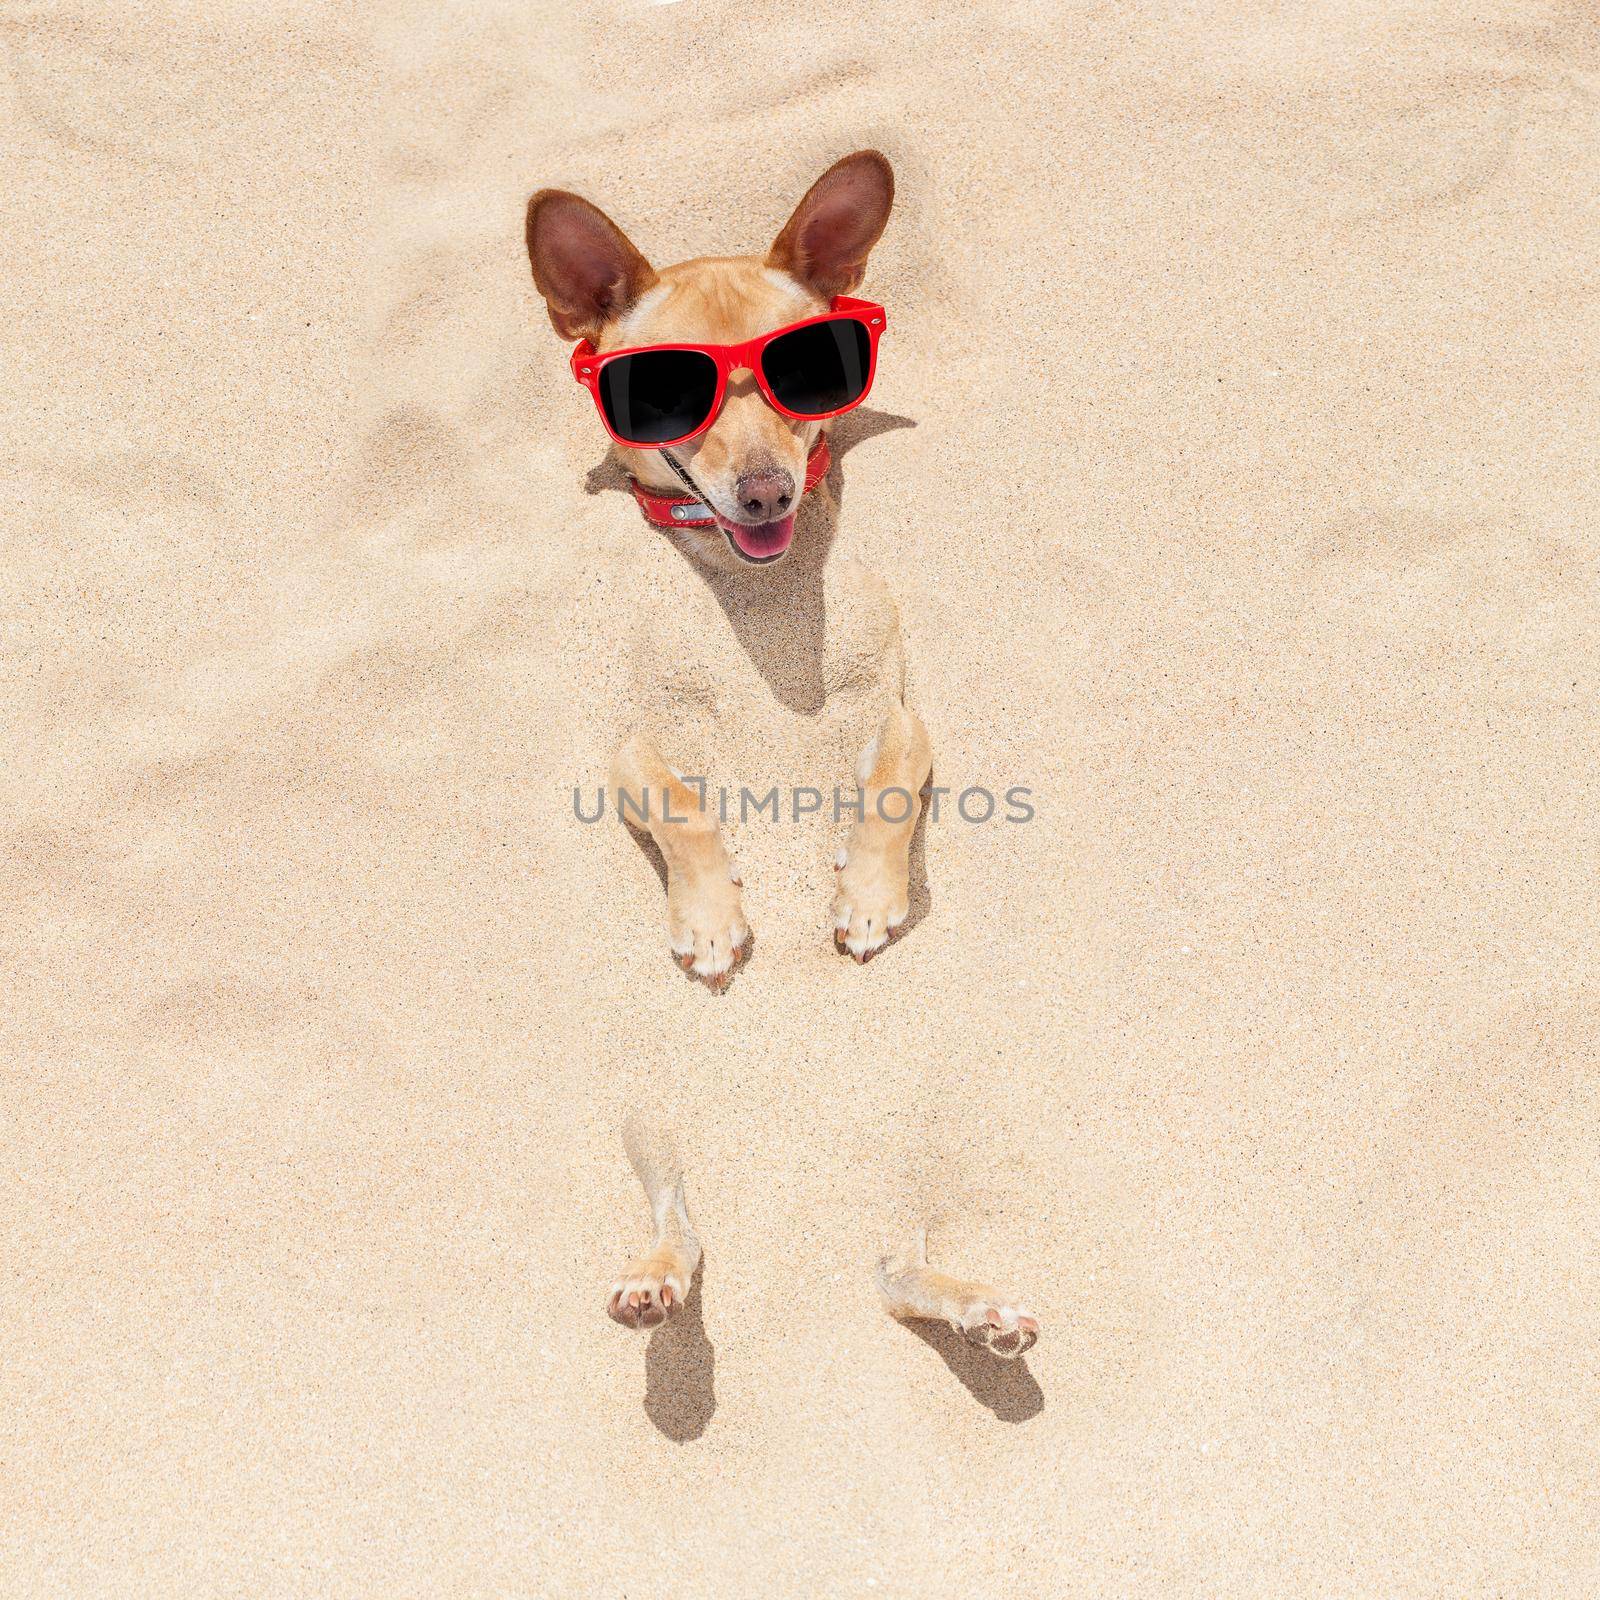 chihuahua dog  buried in the sand at the beach on summer vacation holidays , wearing red sunglasses